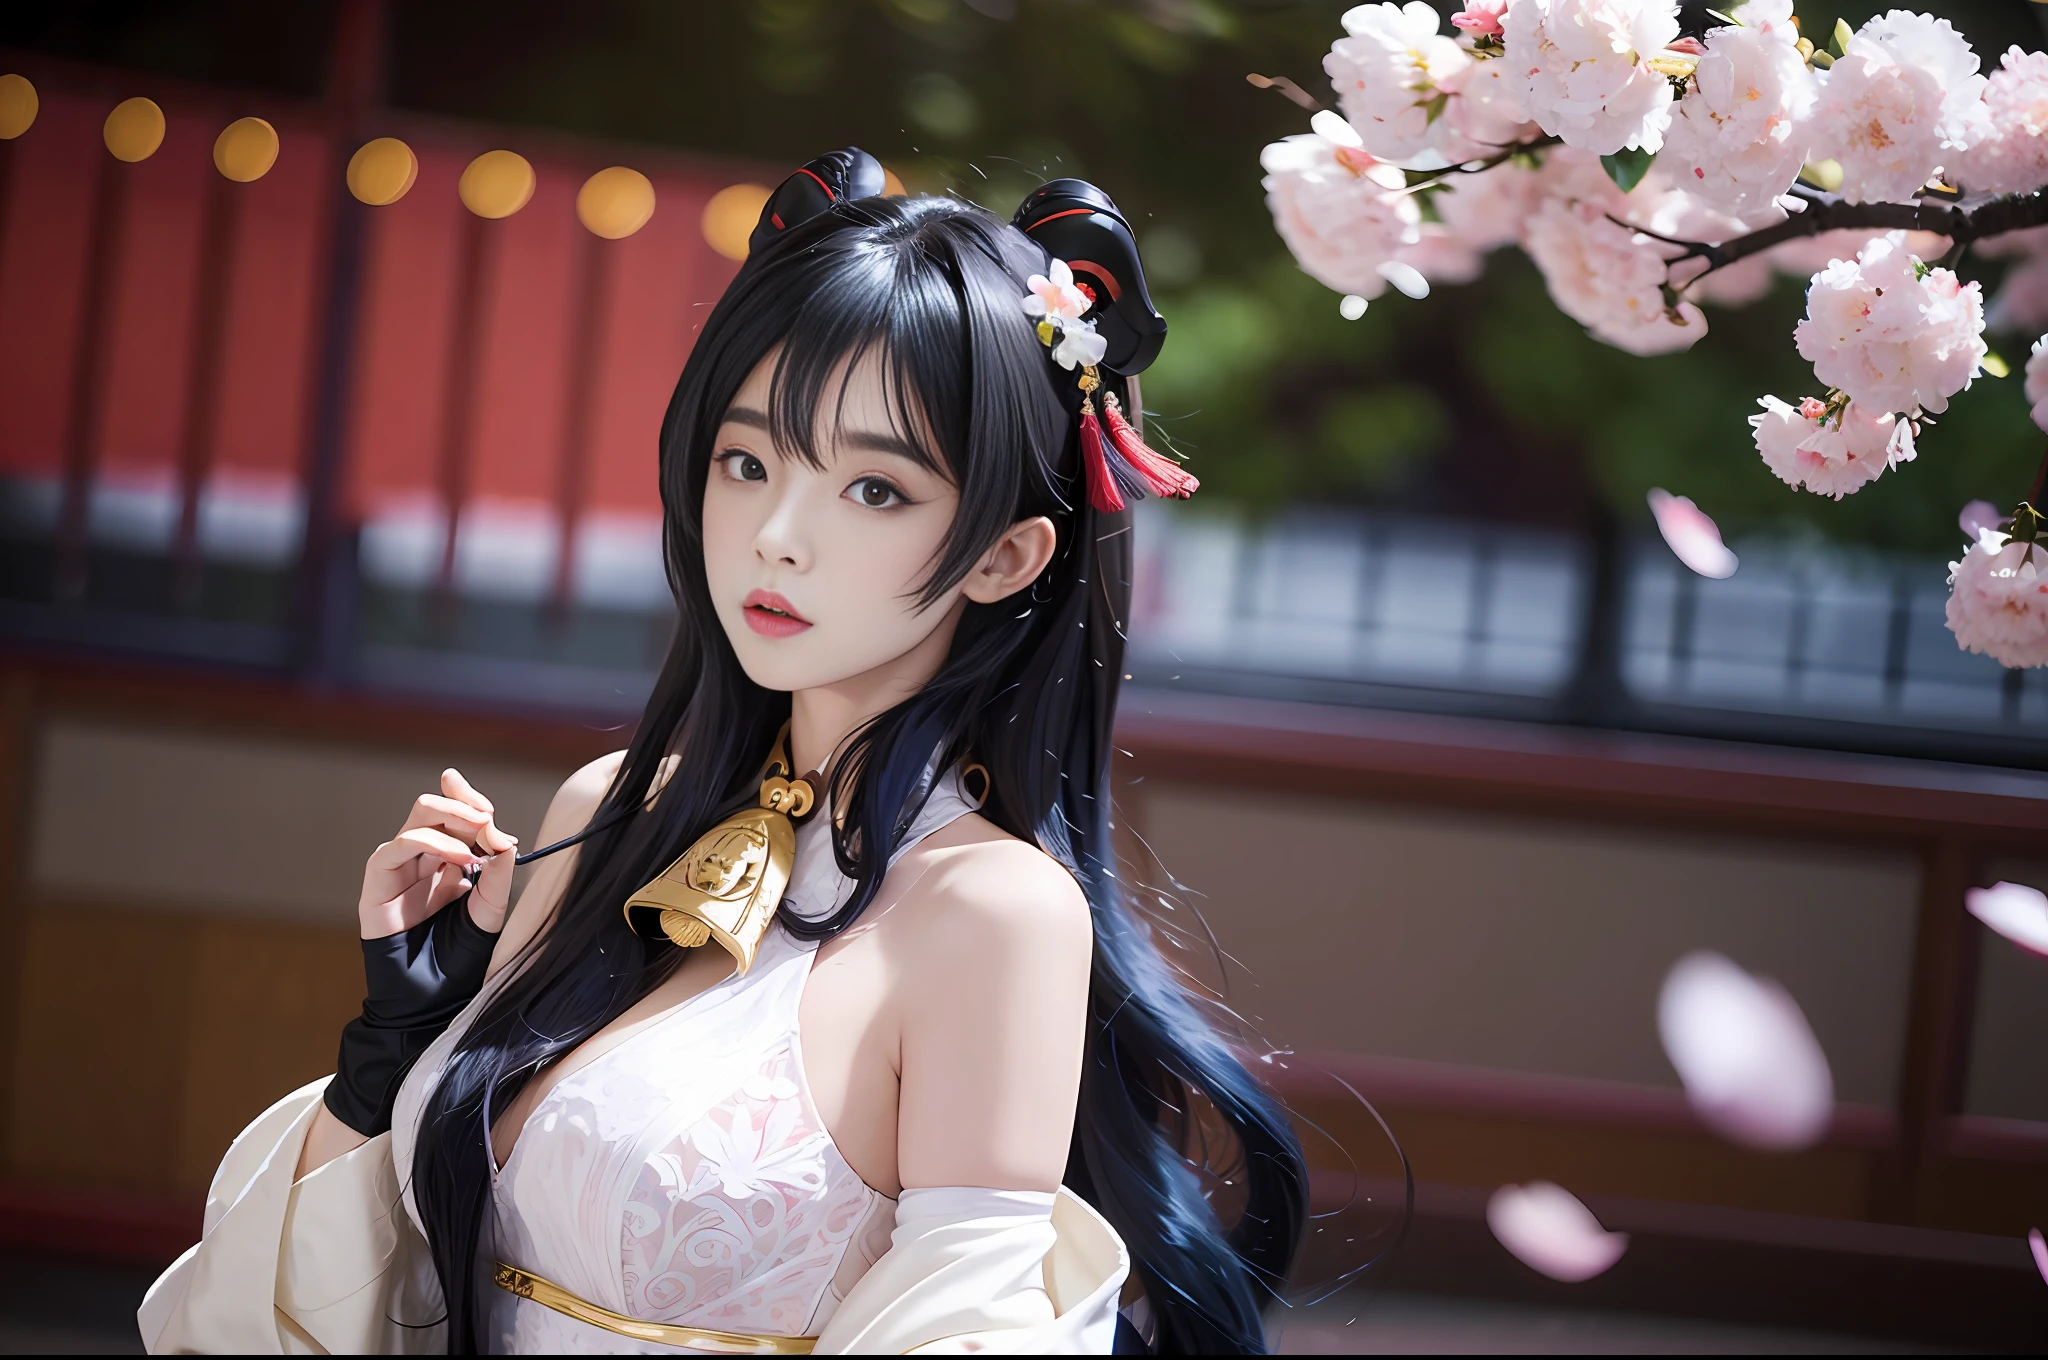 ((Masterpiece)), (Very detailed CG unity 8k wallpaper), best quality, illustration, beautiful detail eyes, beautiful detail hair, very_long_hair, 1 girl, gan yu, ganyu, 1girl, ahoge, architecture, bangs, bare shoulders, bells, black gloves, black tights, (blue hair), blush, beautiful breasts, chinese knots, sleeves, flower knots, gloves, horns, long hair, looking at the audience, medium chest, neckbell, perfect figure, upper body, korea, style, realism, beauty, ((anime style)), ((best quality)), ((masterpiece)), ((HDR+)), (best performance), (best lighting), on [cherry blossom tree falling petals on university road background], [wlop], [inoue takesano], [oh! Great]